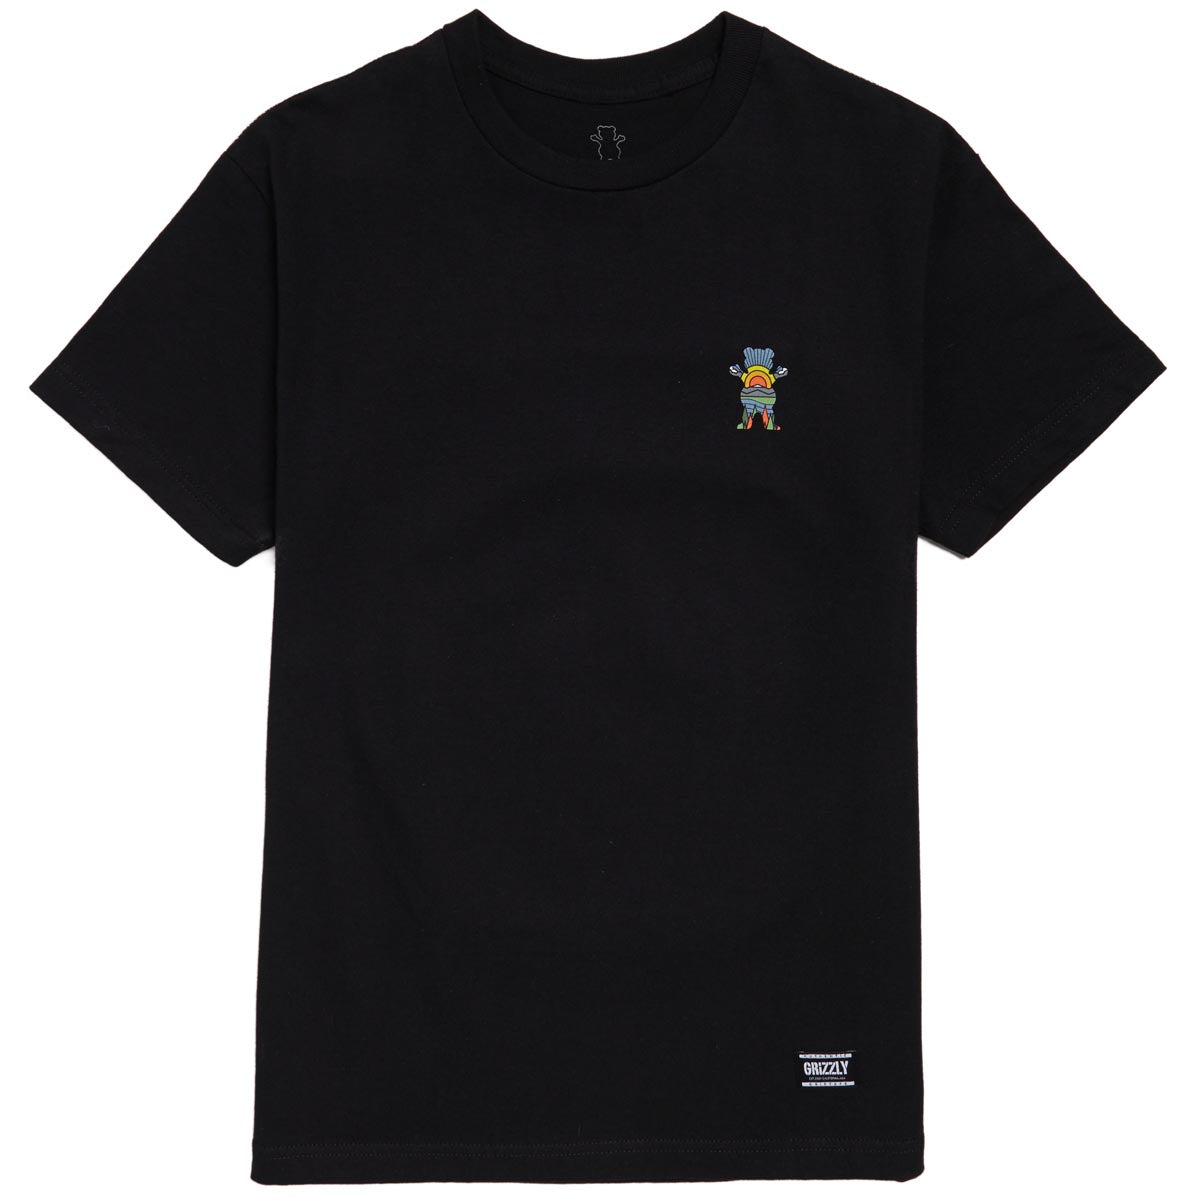 Grizzly Sun Valley T-Shirt - Black image 2